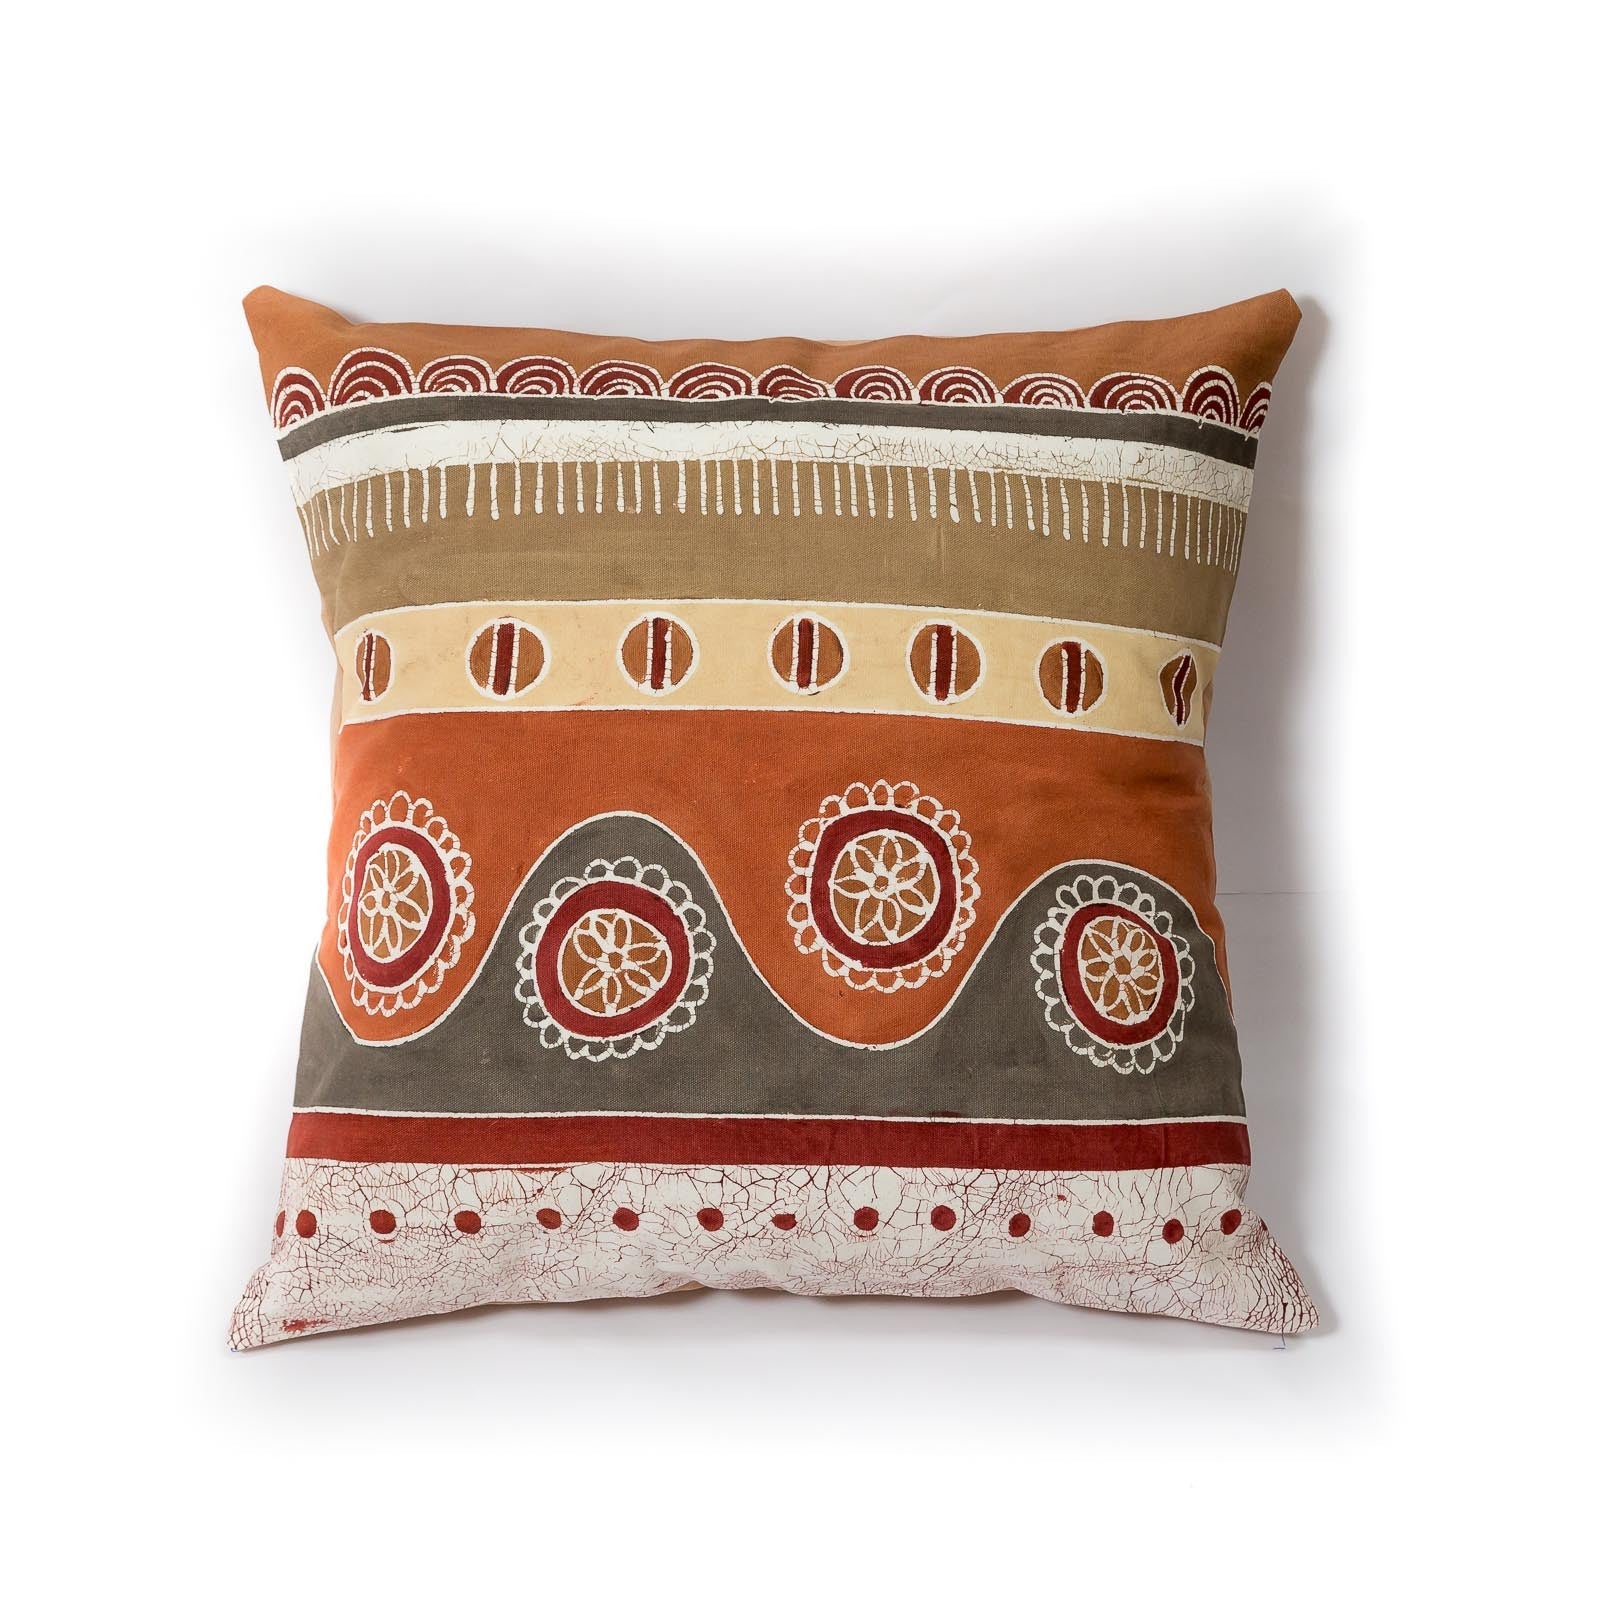 Mali Sienna Wiggle Cushion Cover - Handmade by TRIBAL TEXTILES - Handcrafted Home Decor Interiors - African Made